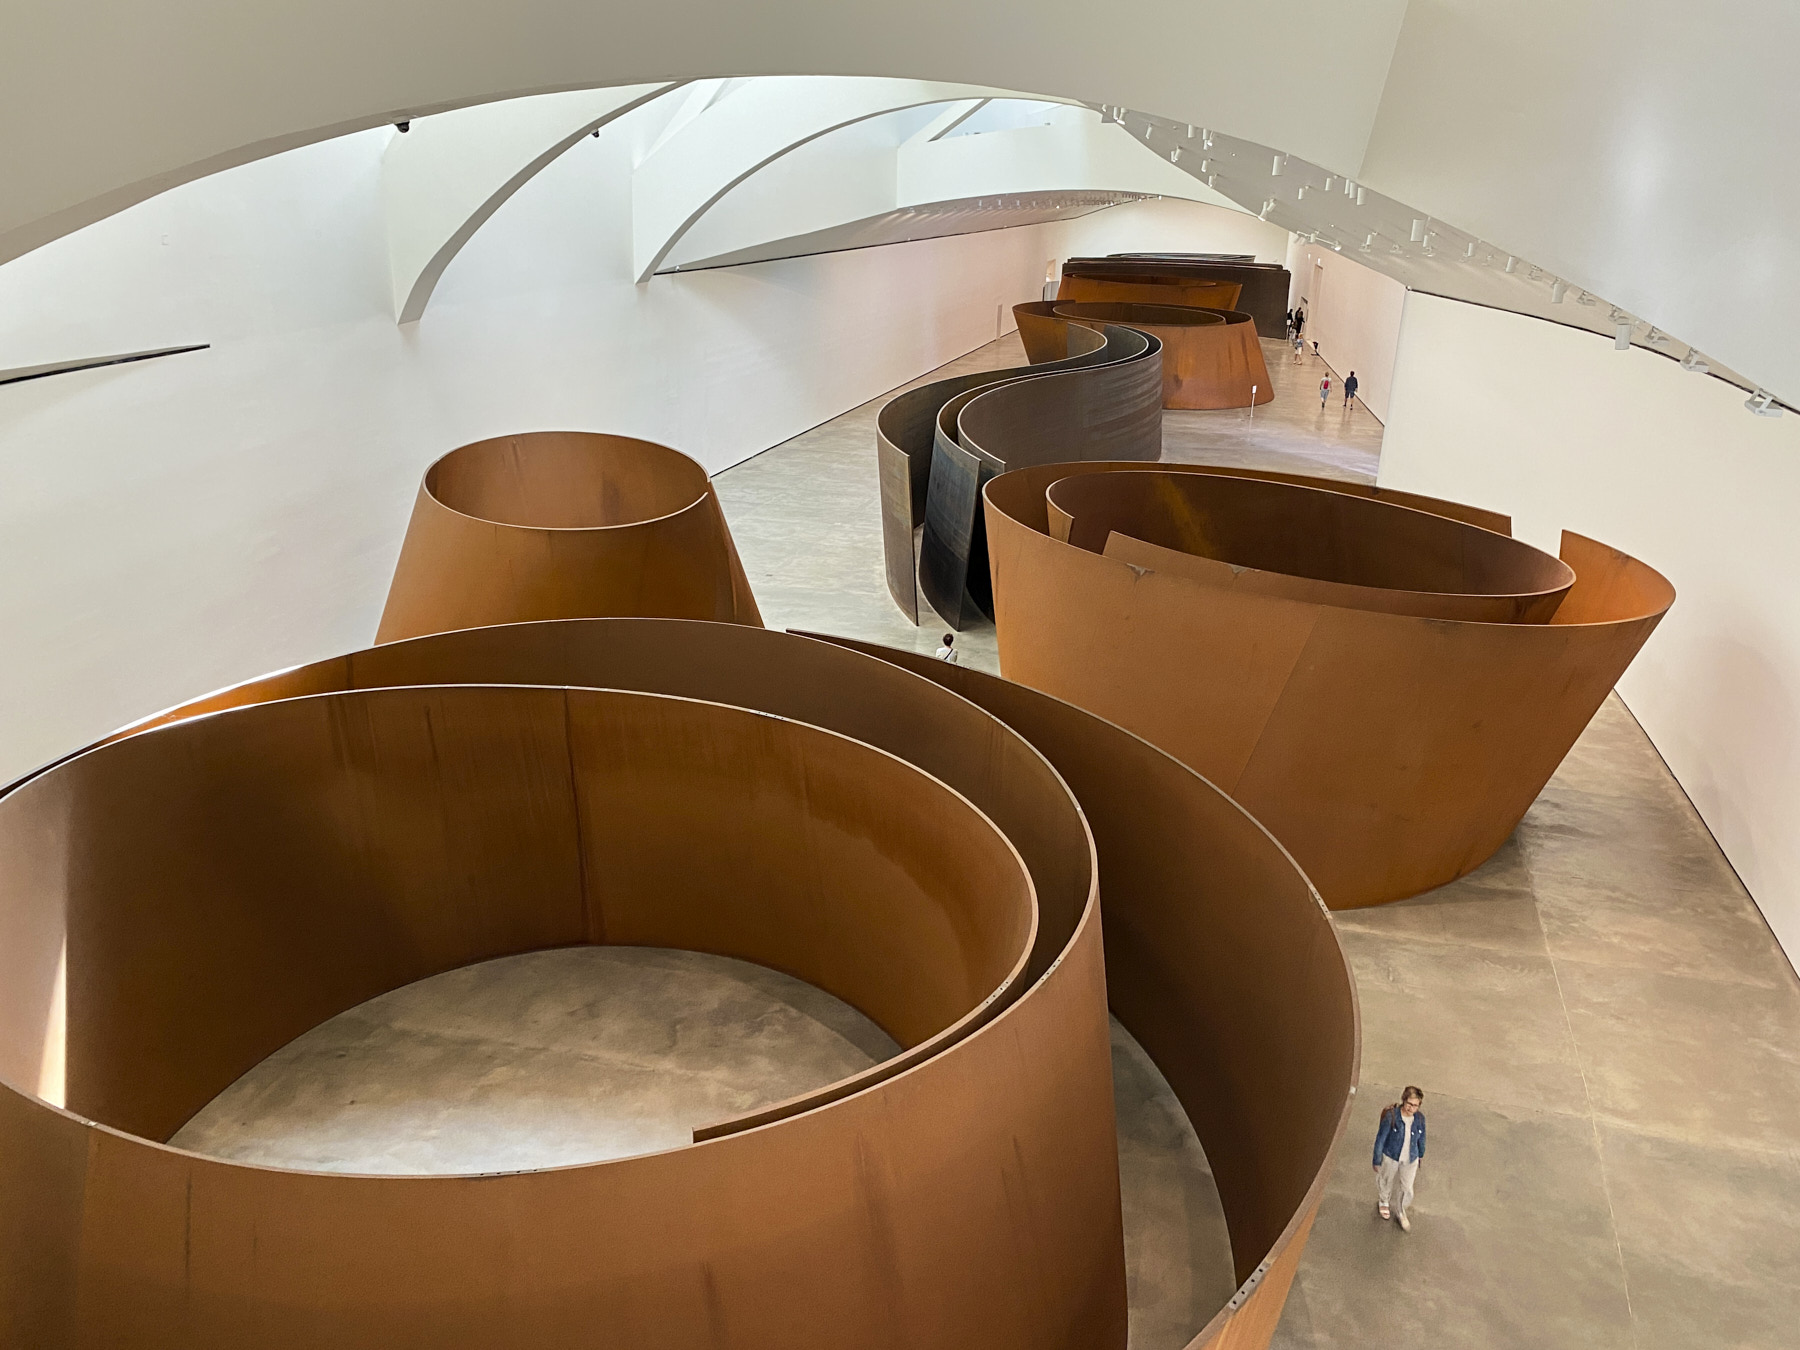 The Matter of Time by Richard Serra